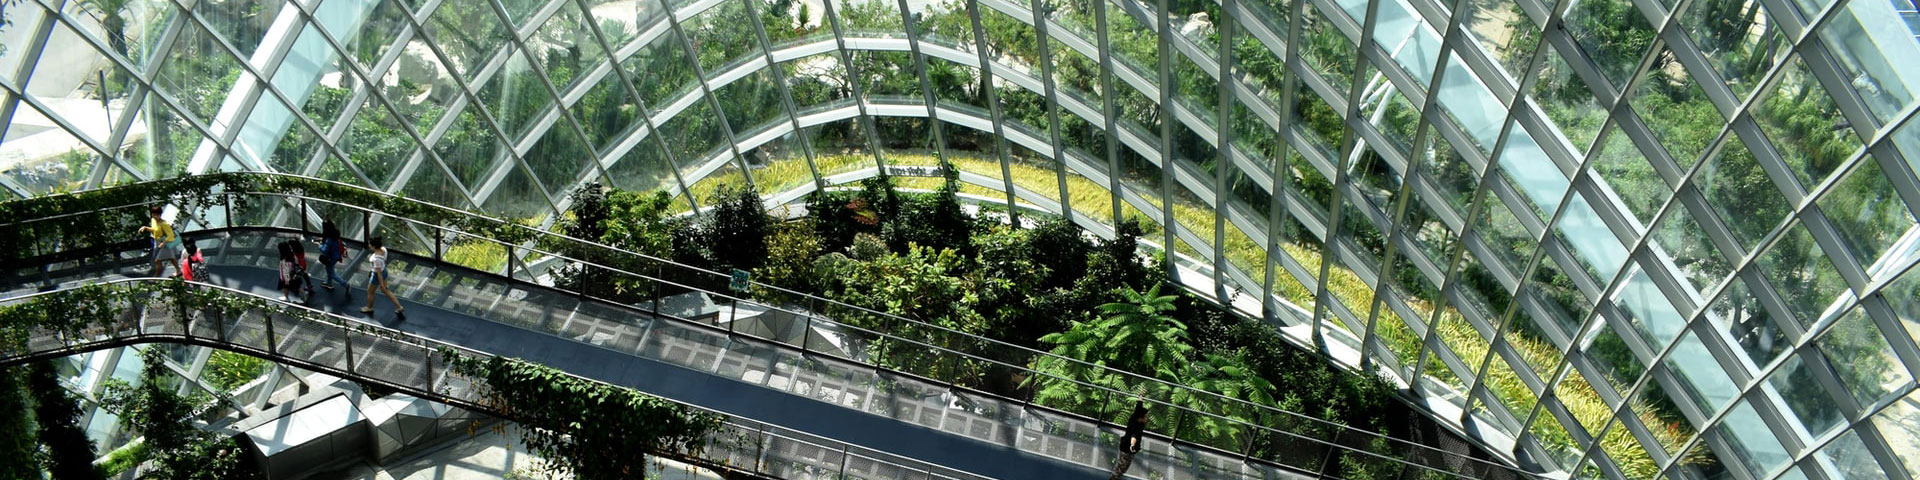 Inside a glass building that has trees and plants growing in it